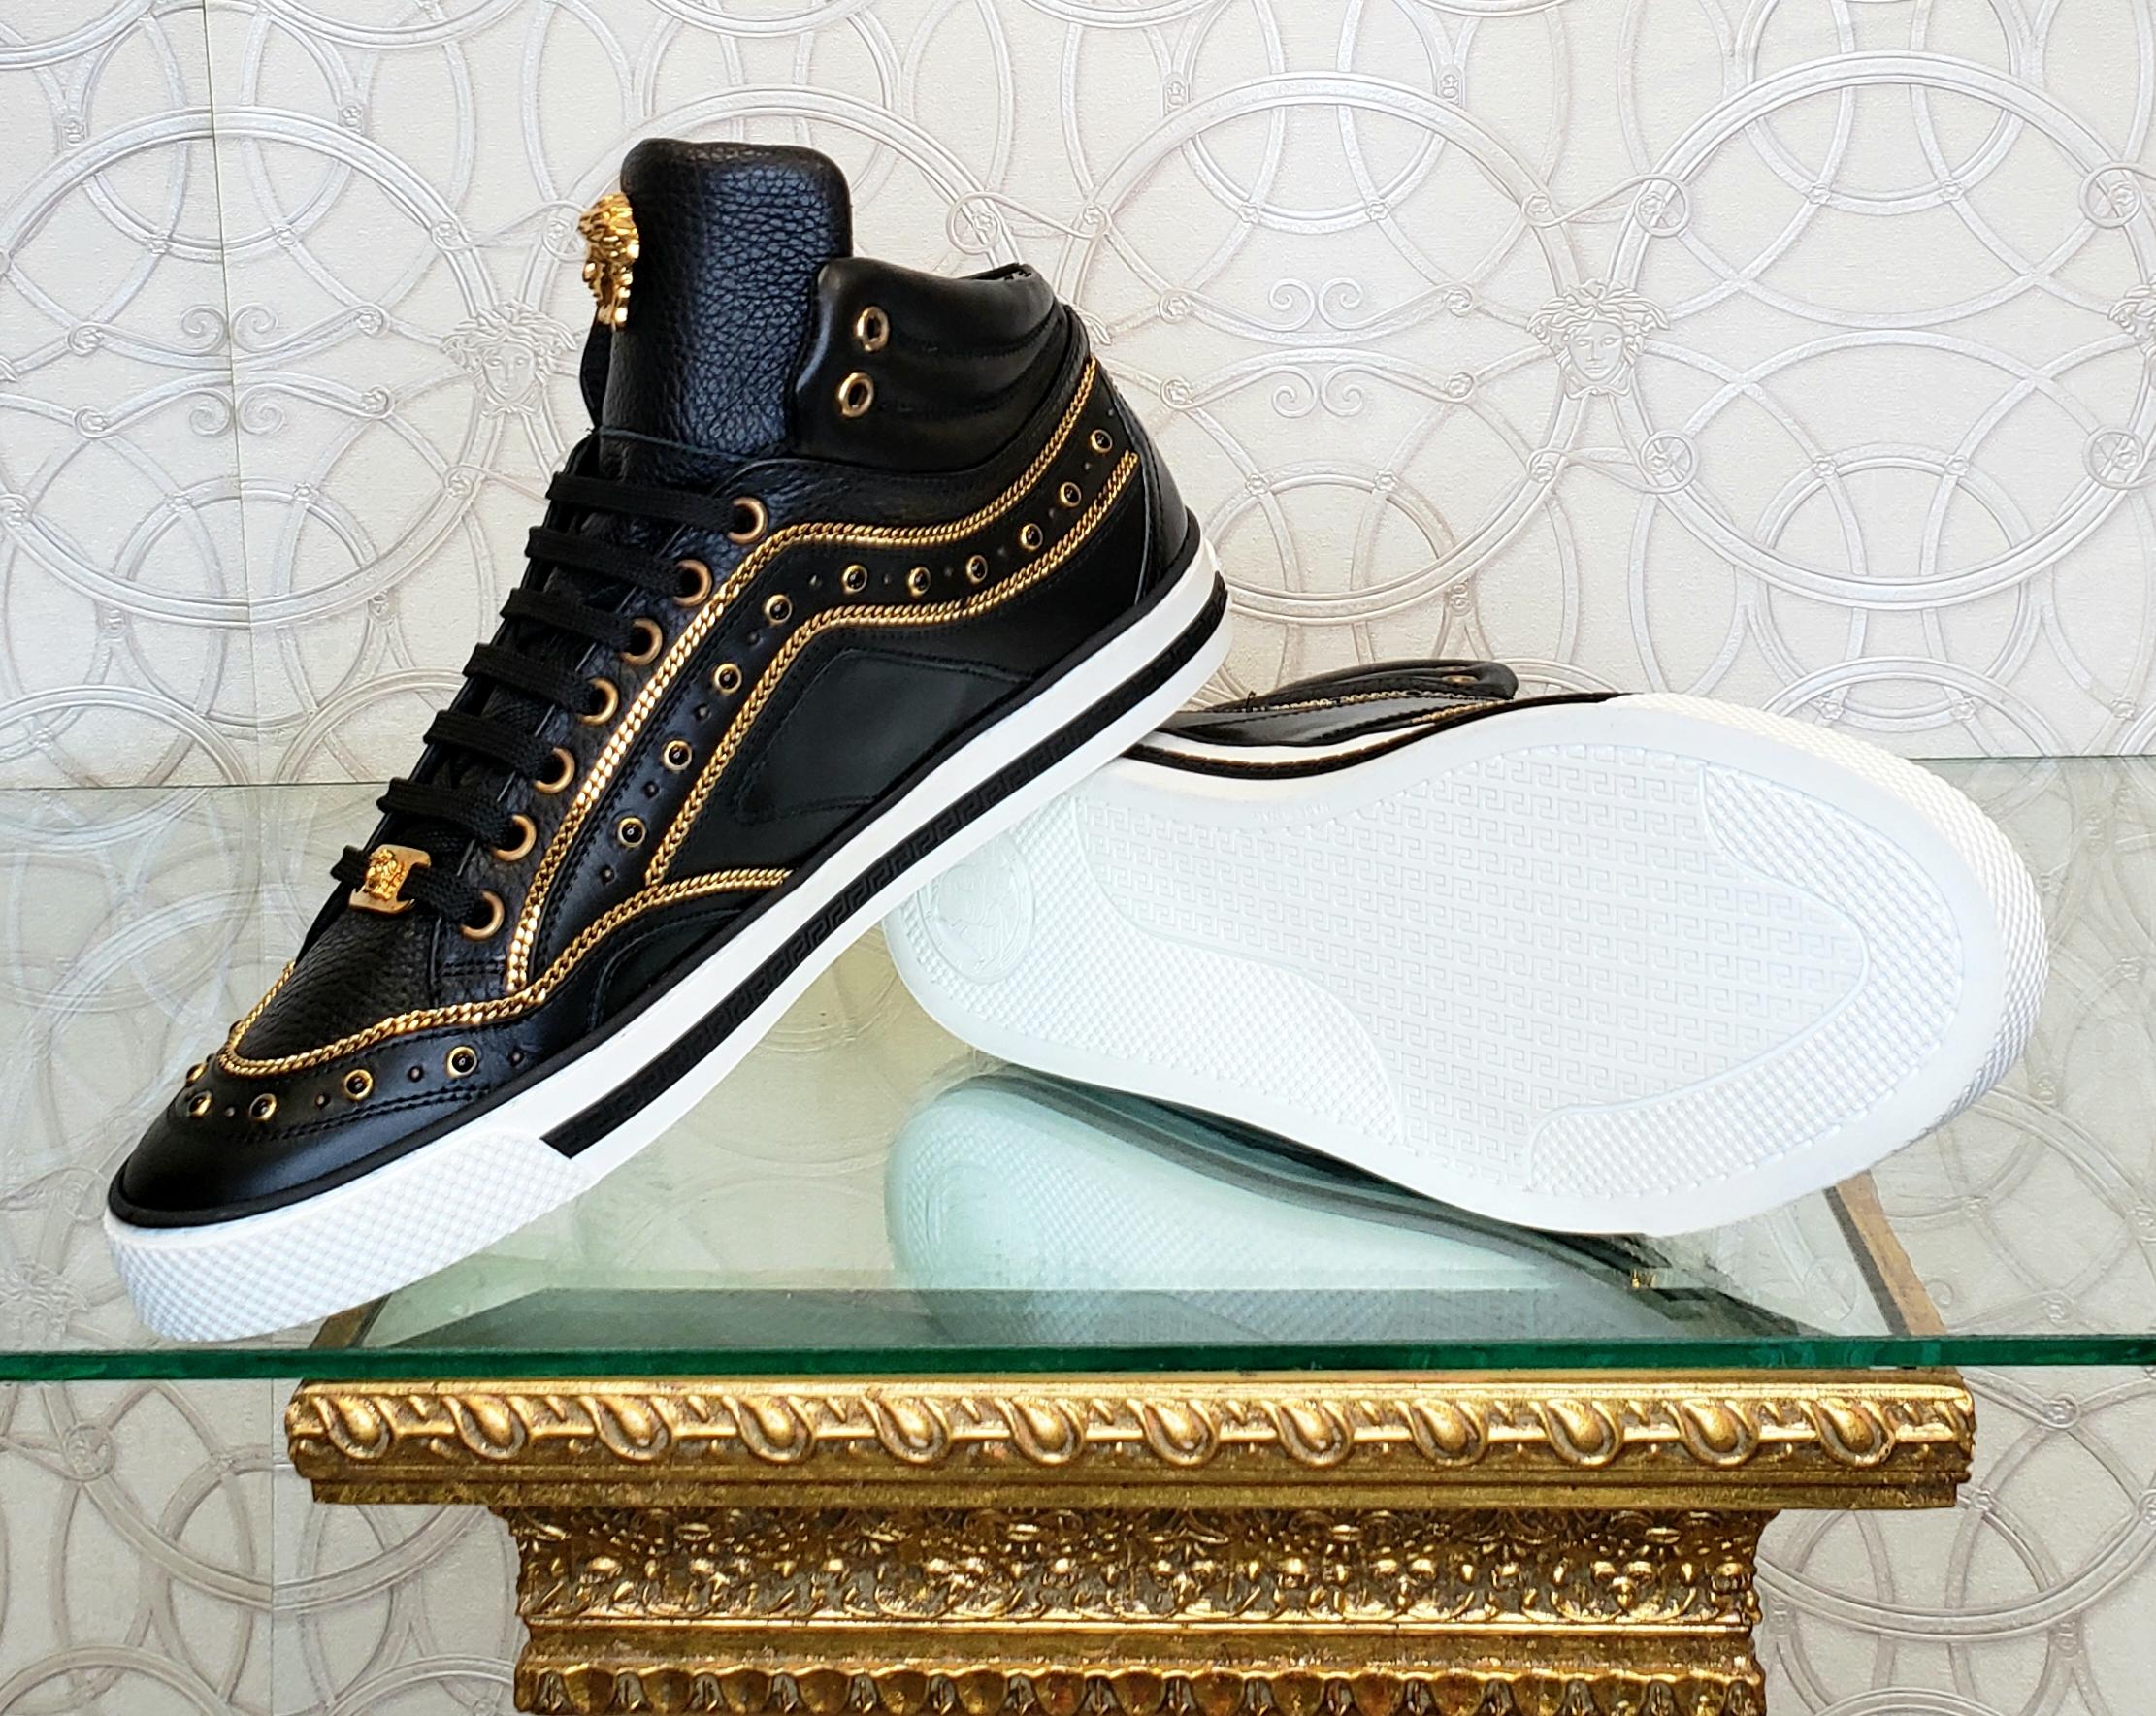 Black NEW VERSACE STUDDED HIGH-TOP SNEAKERS with GOLD 3D MEDUSA BUCKLE SIZE 39 - 6